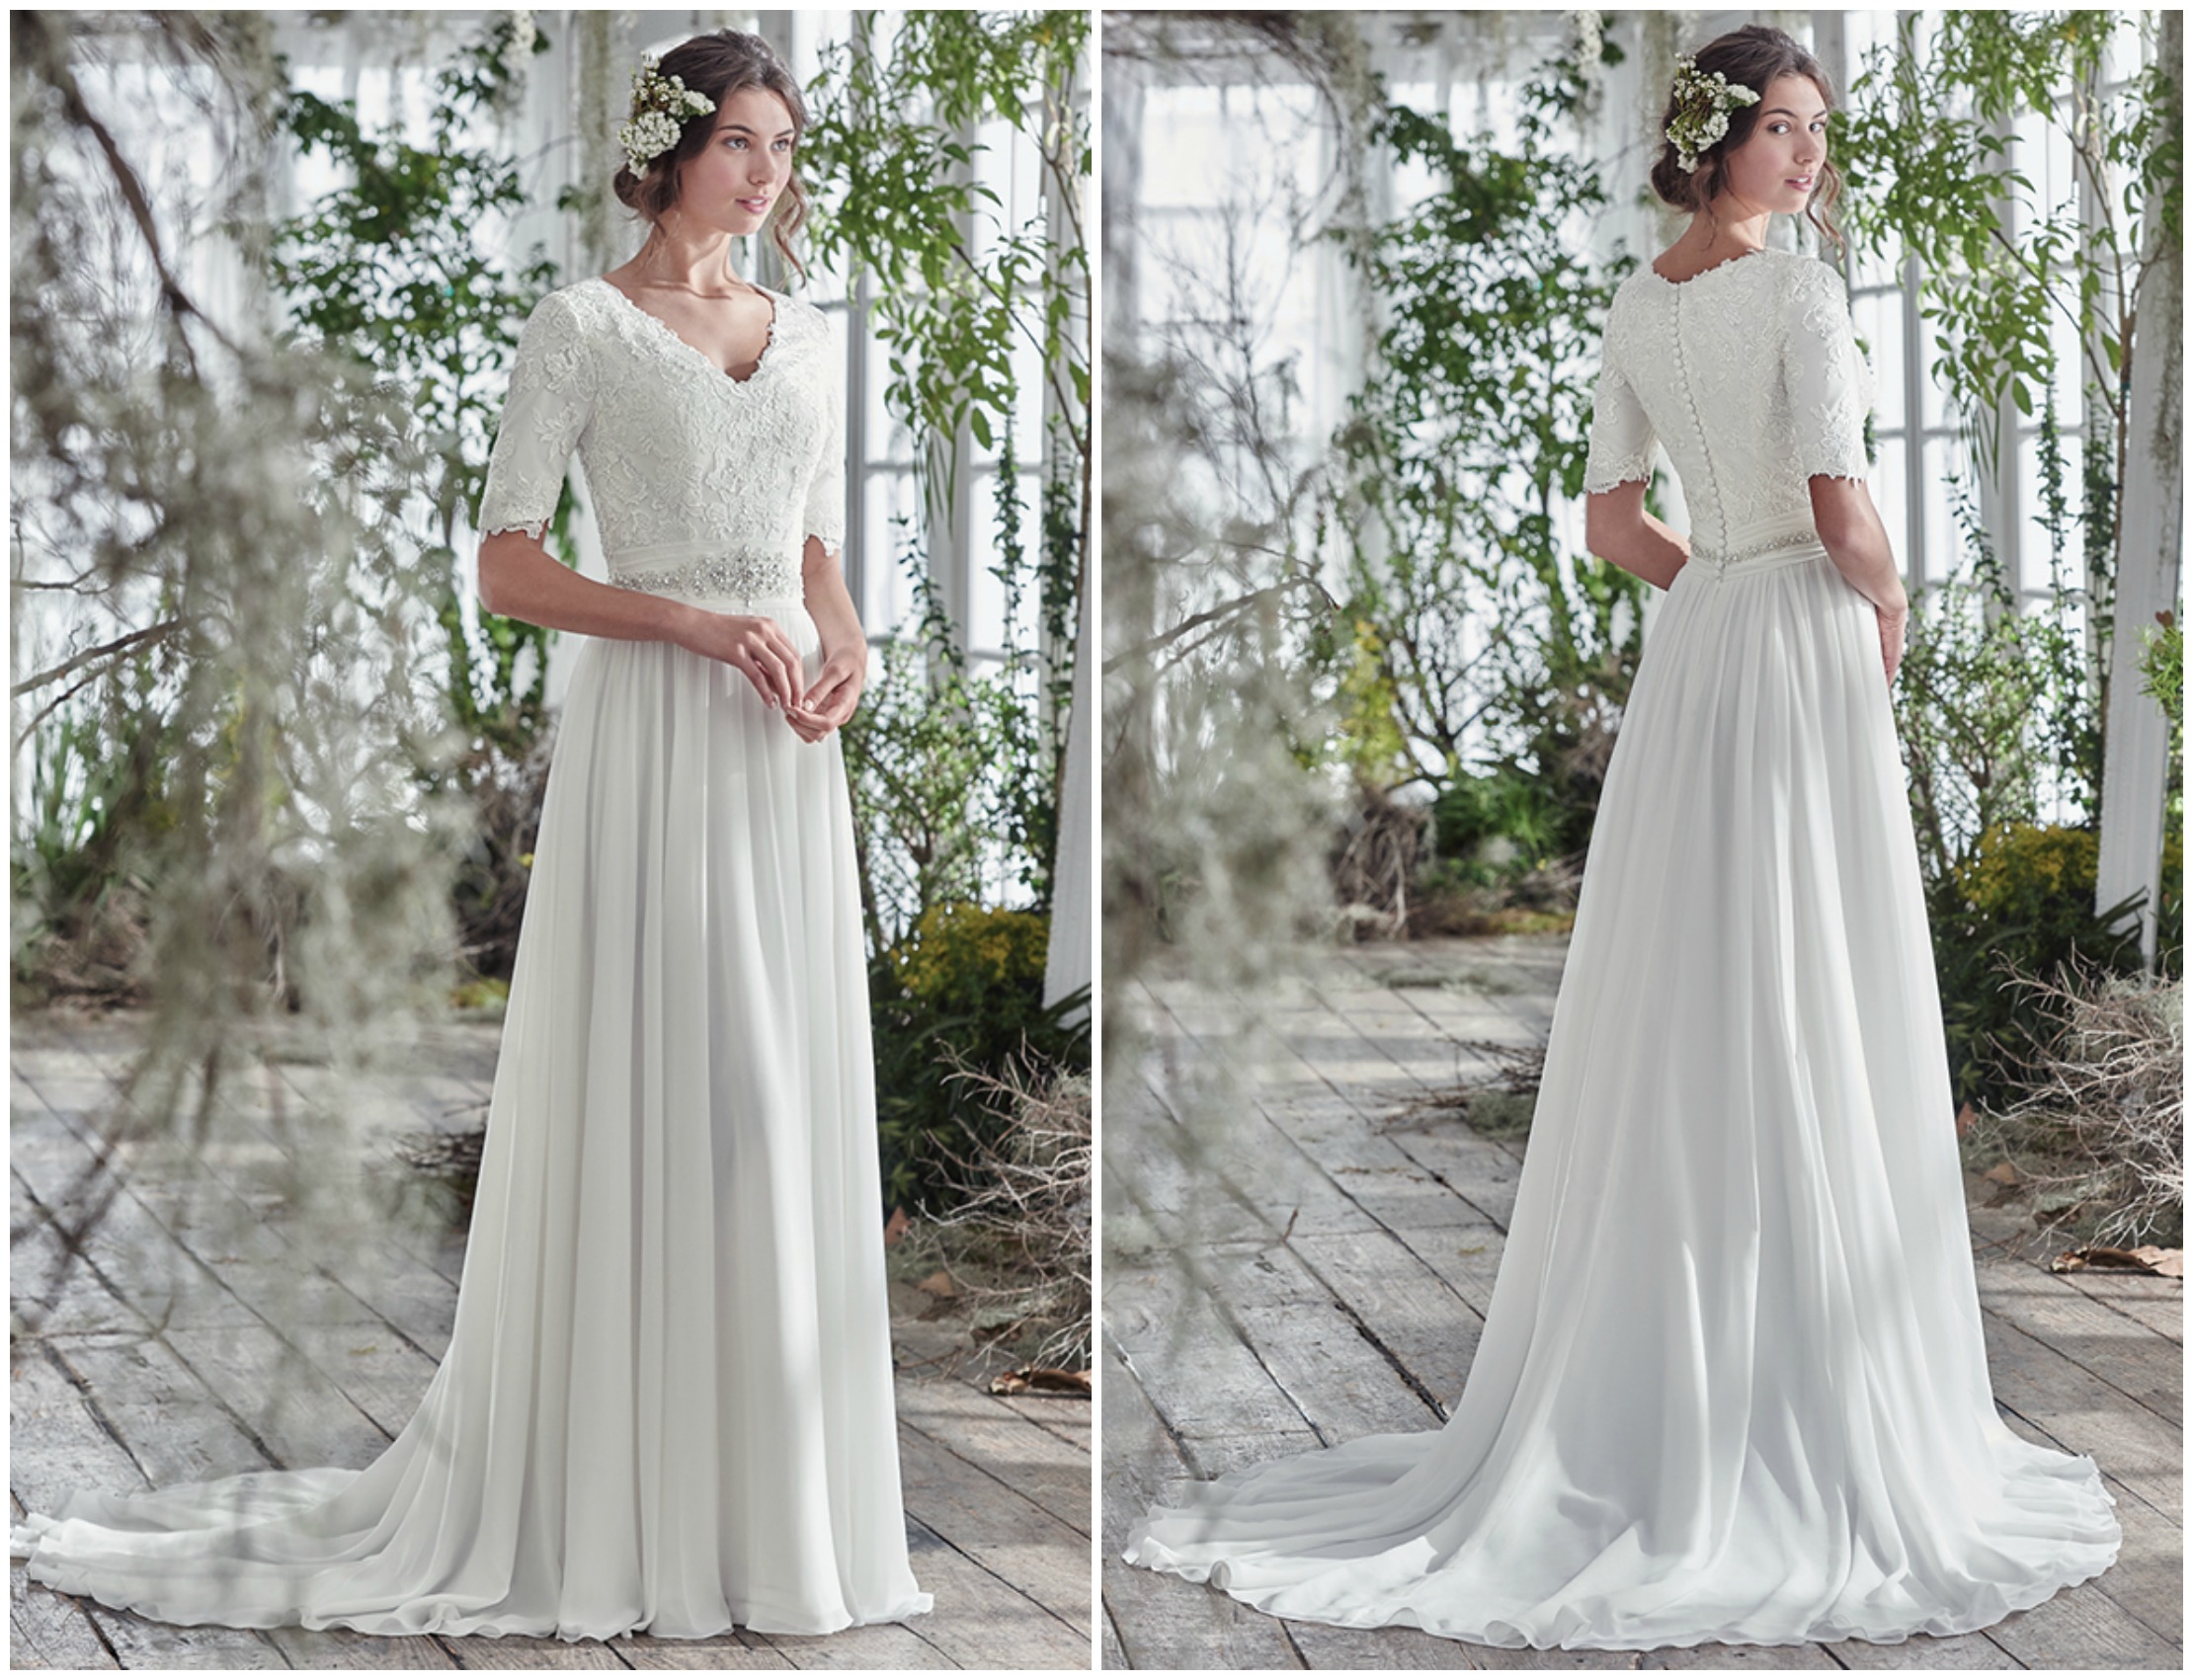 Sophisticated with a touch of whimsy, this elegant A-line wedding dress offers a lace bodice, intricately beaded belt at the waist, and an ethereally lightweight Aurora chiffon skirt. Finished with a soft V-neckline, half length sleeve, and covered buttons over zipper and inner elastic closure. 

<a href="https://www.maggiesottero.com/maggie-sottero/lyliette/9772" target="_blank">Maggie Sottero</a>